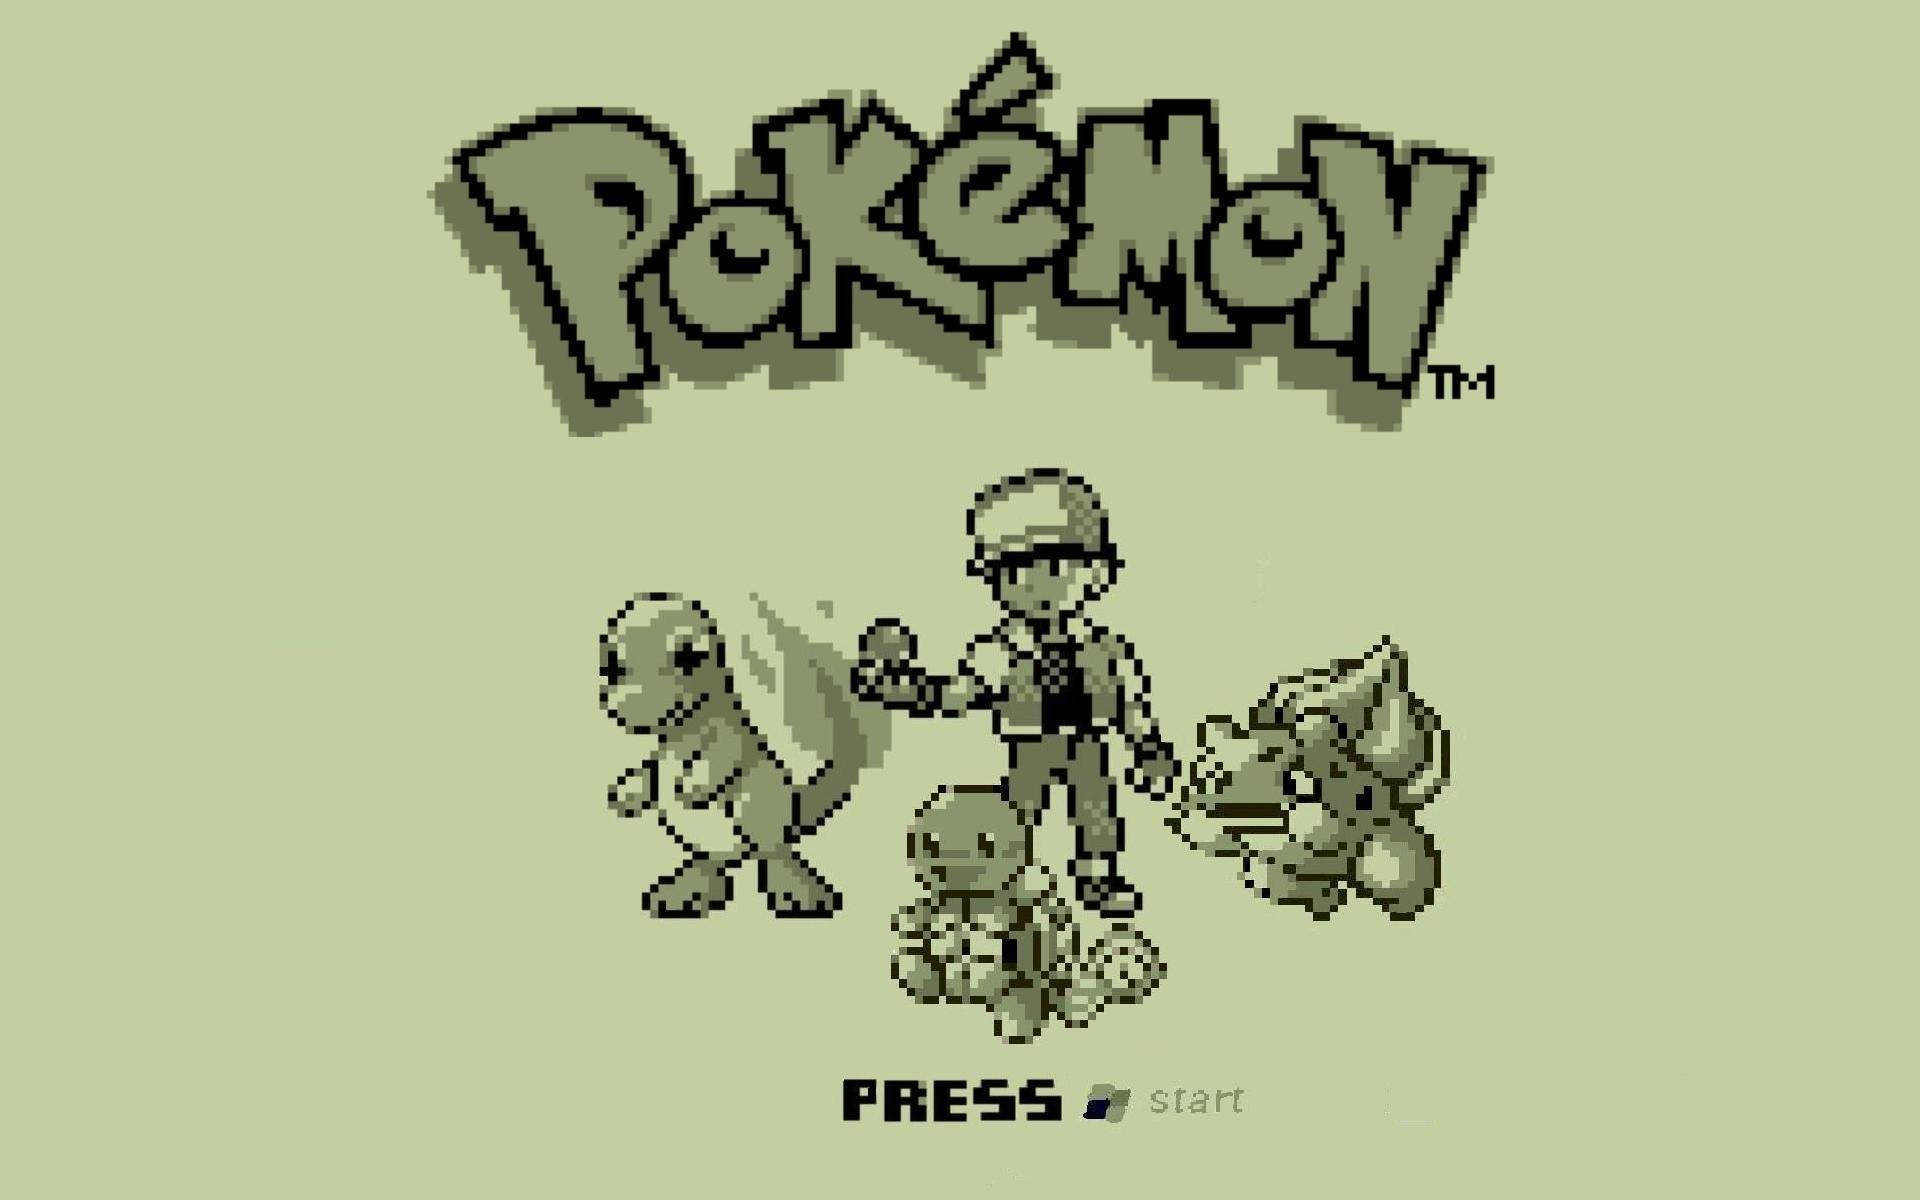 A Monochrome Pixelated Squirtle Pokemon Ready for a Battle Wallpaper